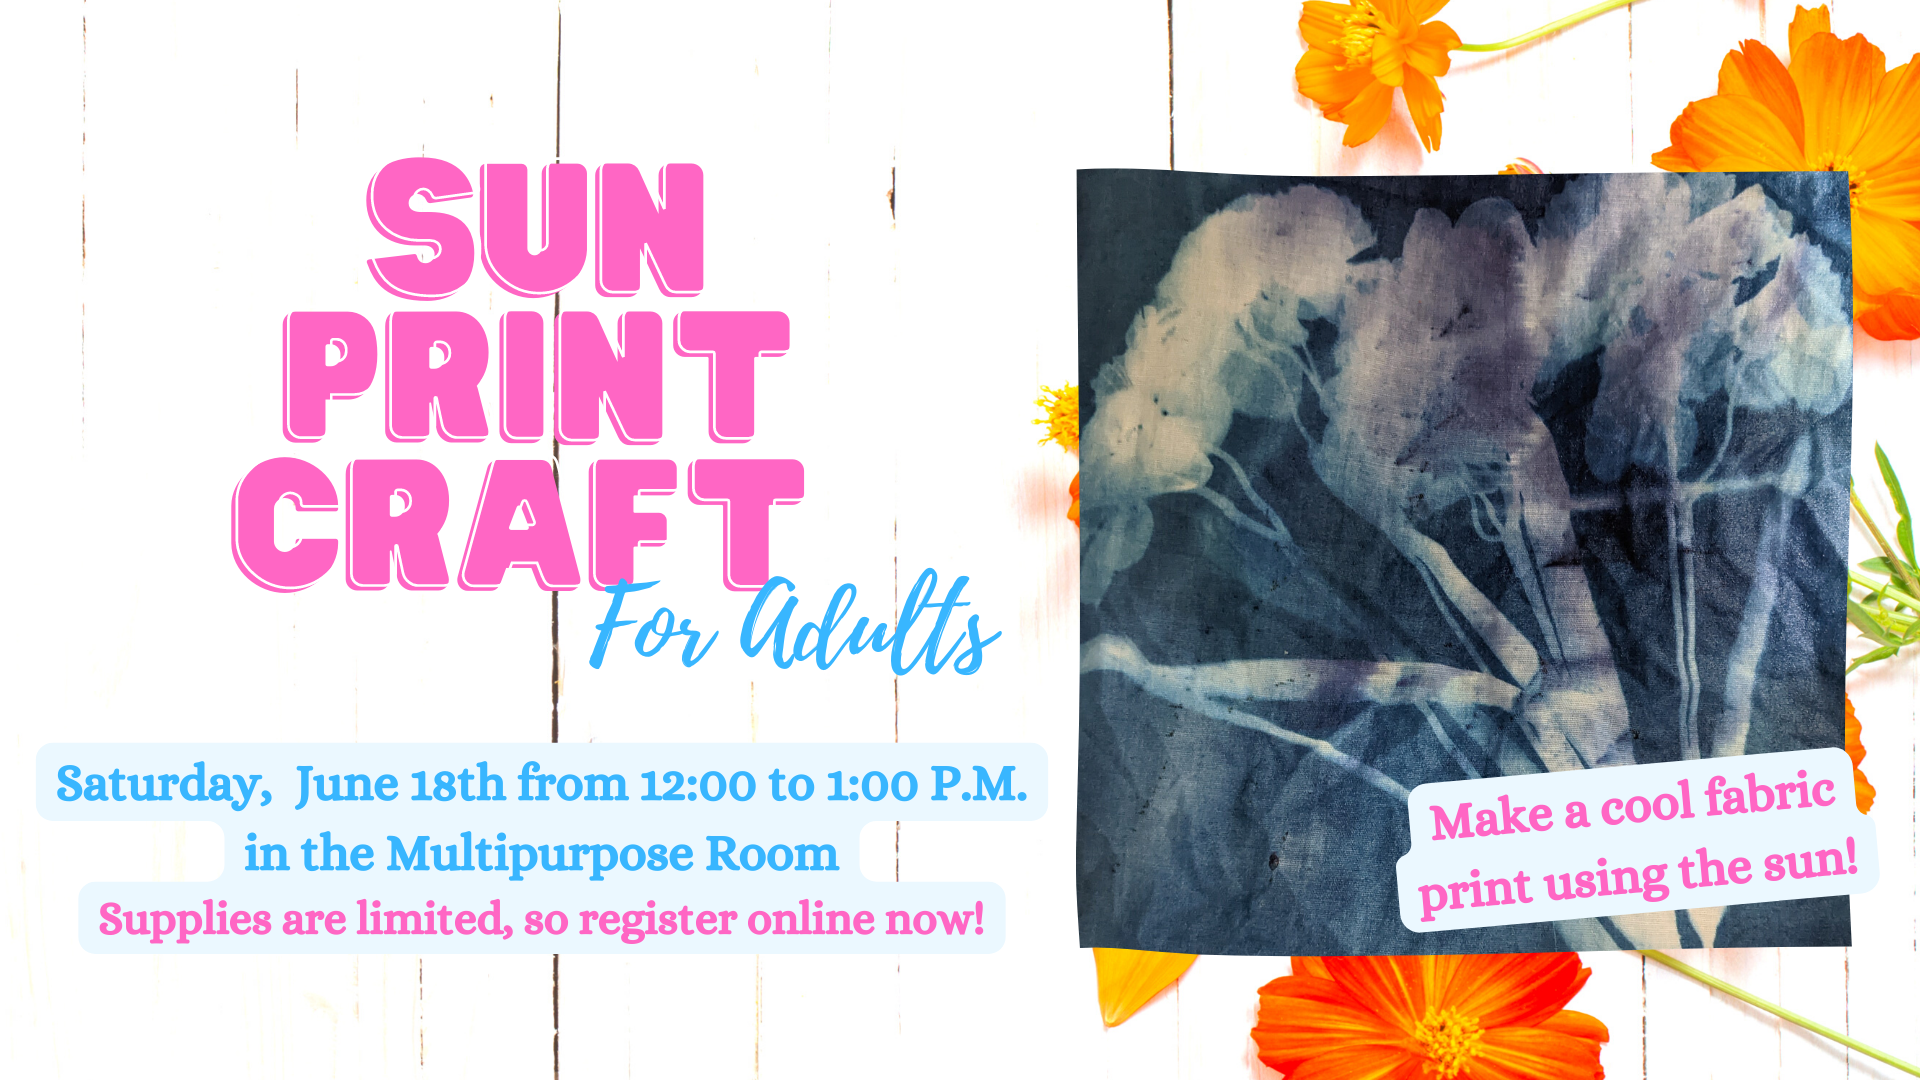 promotional flyer for Sun Print Craft program to be held on Saturday, June 18th from 12:00 to 1:00 